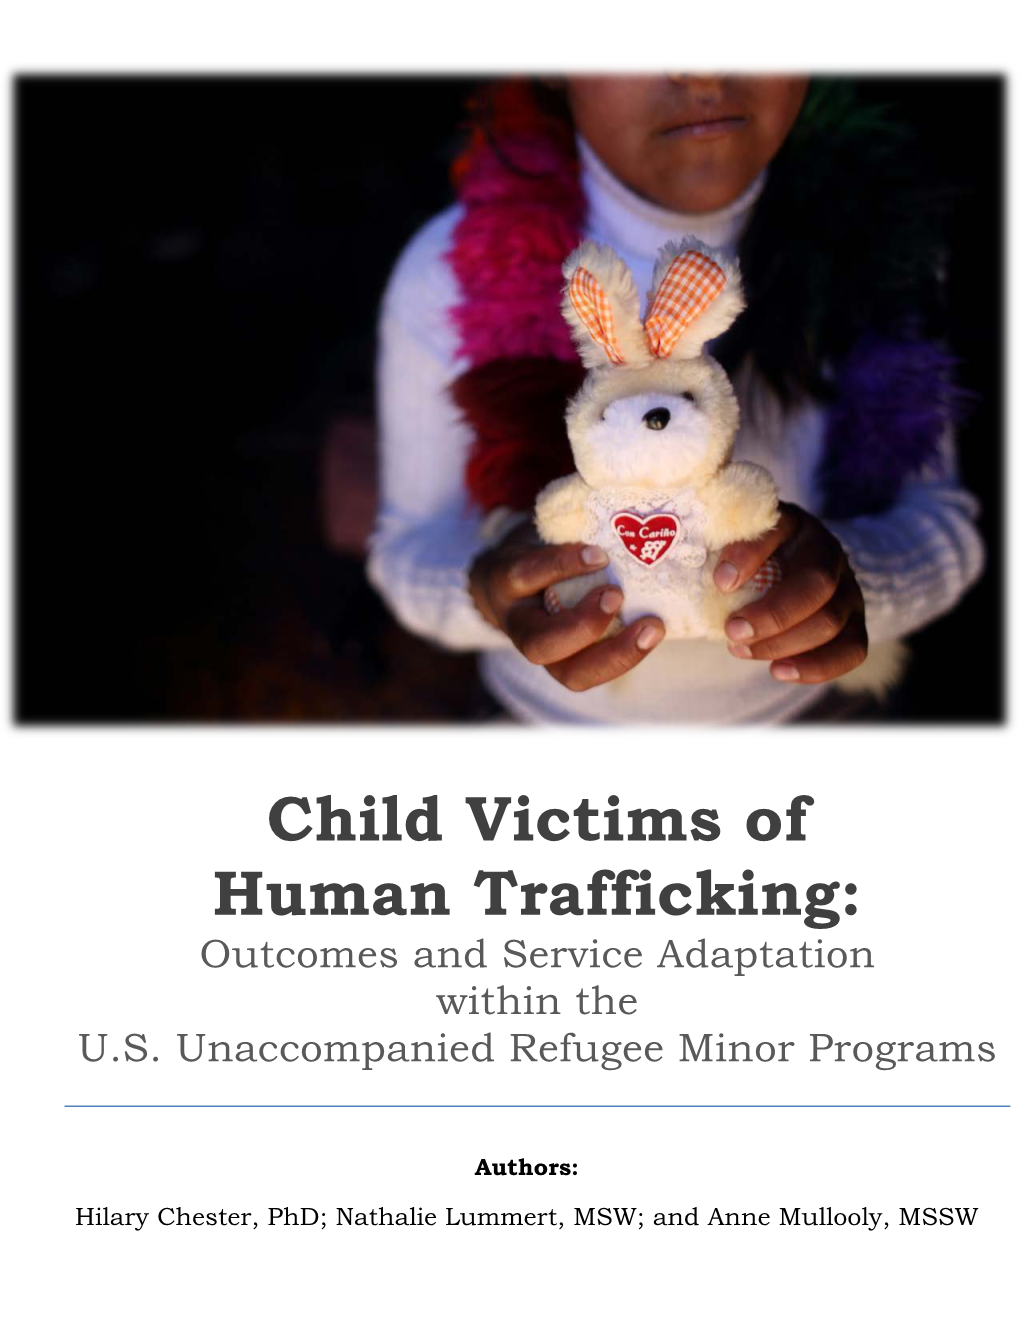 Child Victims of Human Trafficking: Outcomes and Service Adaptation Within the U.S